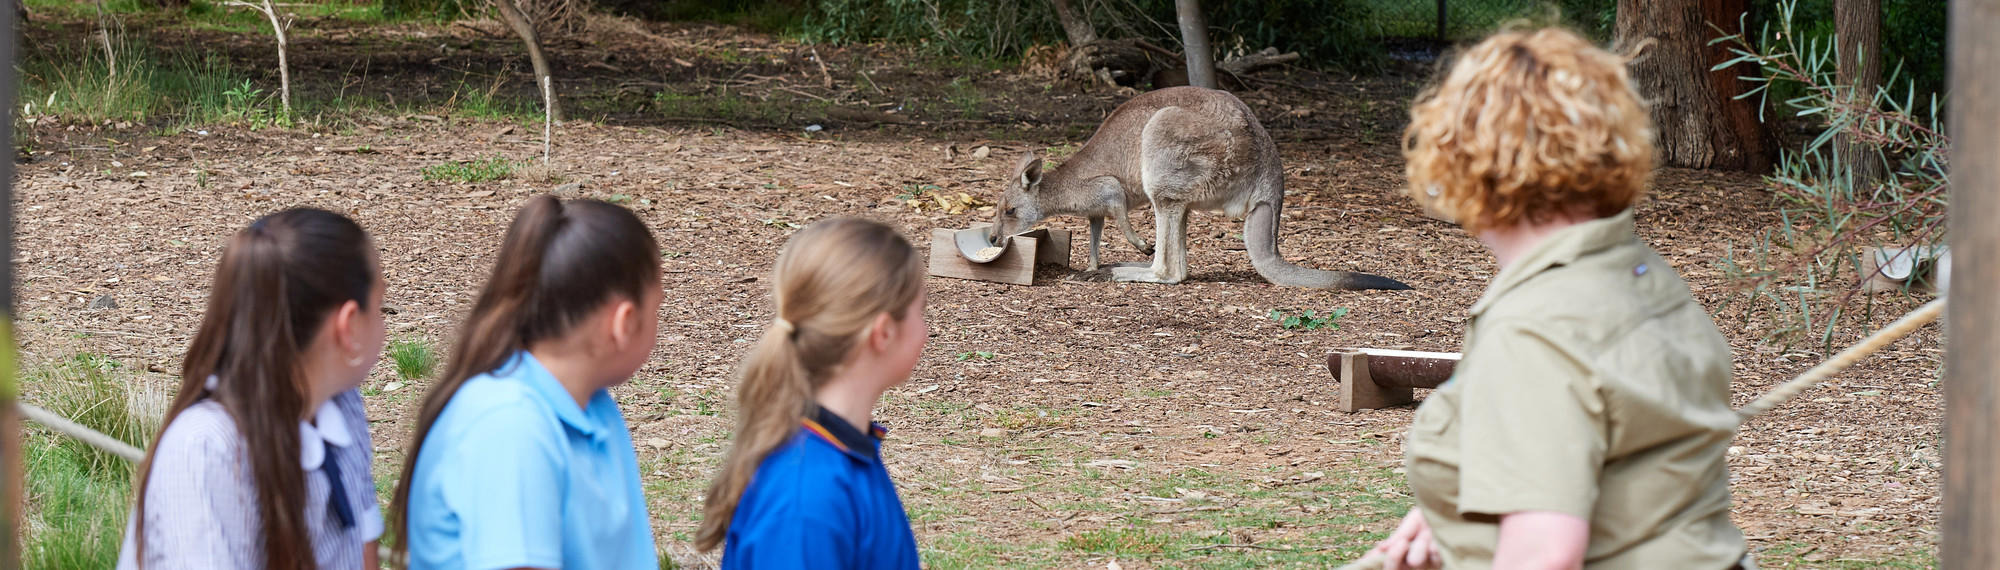 A zoo keeper and group of three teens dressed in school uniform look at an Eastern Grey Kangaroo eating from a trough